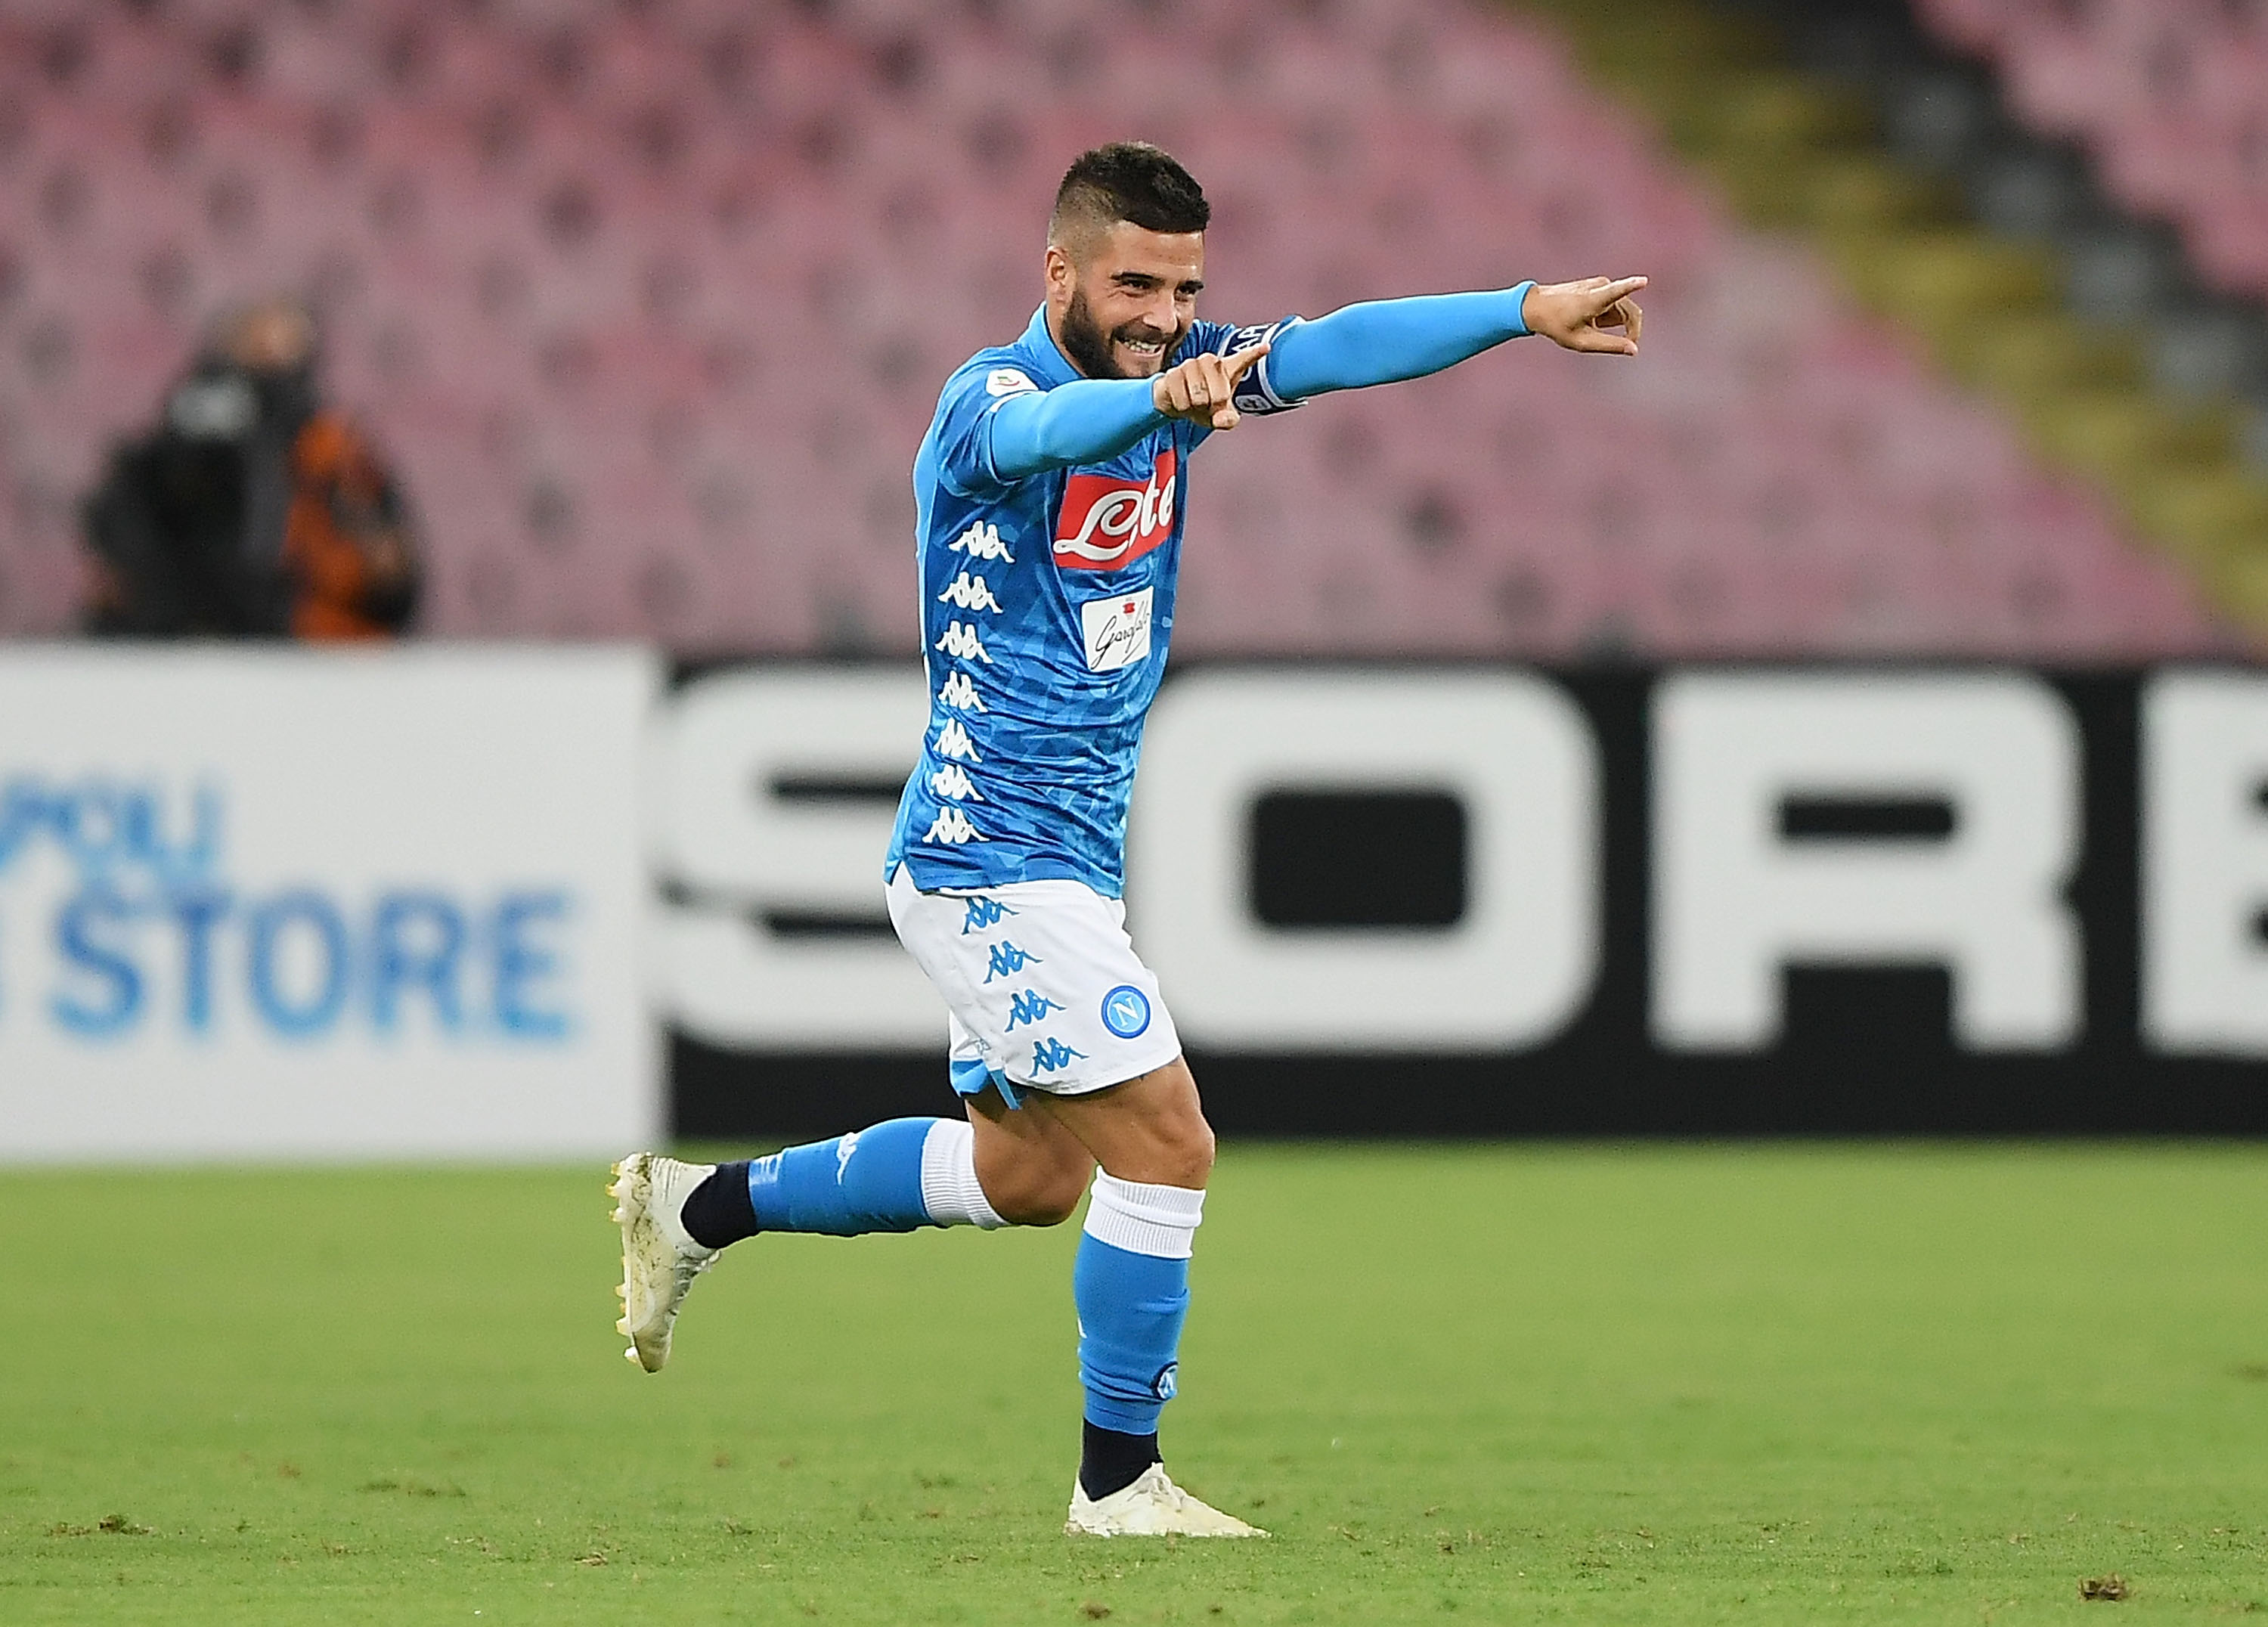 NAPLES, ITALY - SEPTEMBER 26:  Lorenzo Insigne of SSC Napoli celebrates after scoring the 1-0 goal during the serie A match between SSC Napoli and Parma Calcio at Stadio San Paolo on September 26, 2018 in Naples, Italy.  (Photo by Francesco Pecoraro/Getty Images)